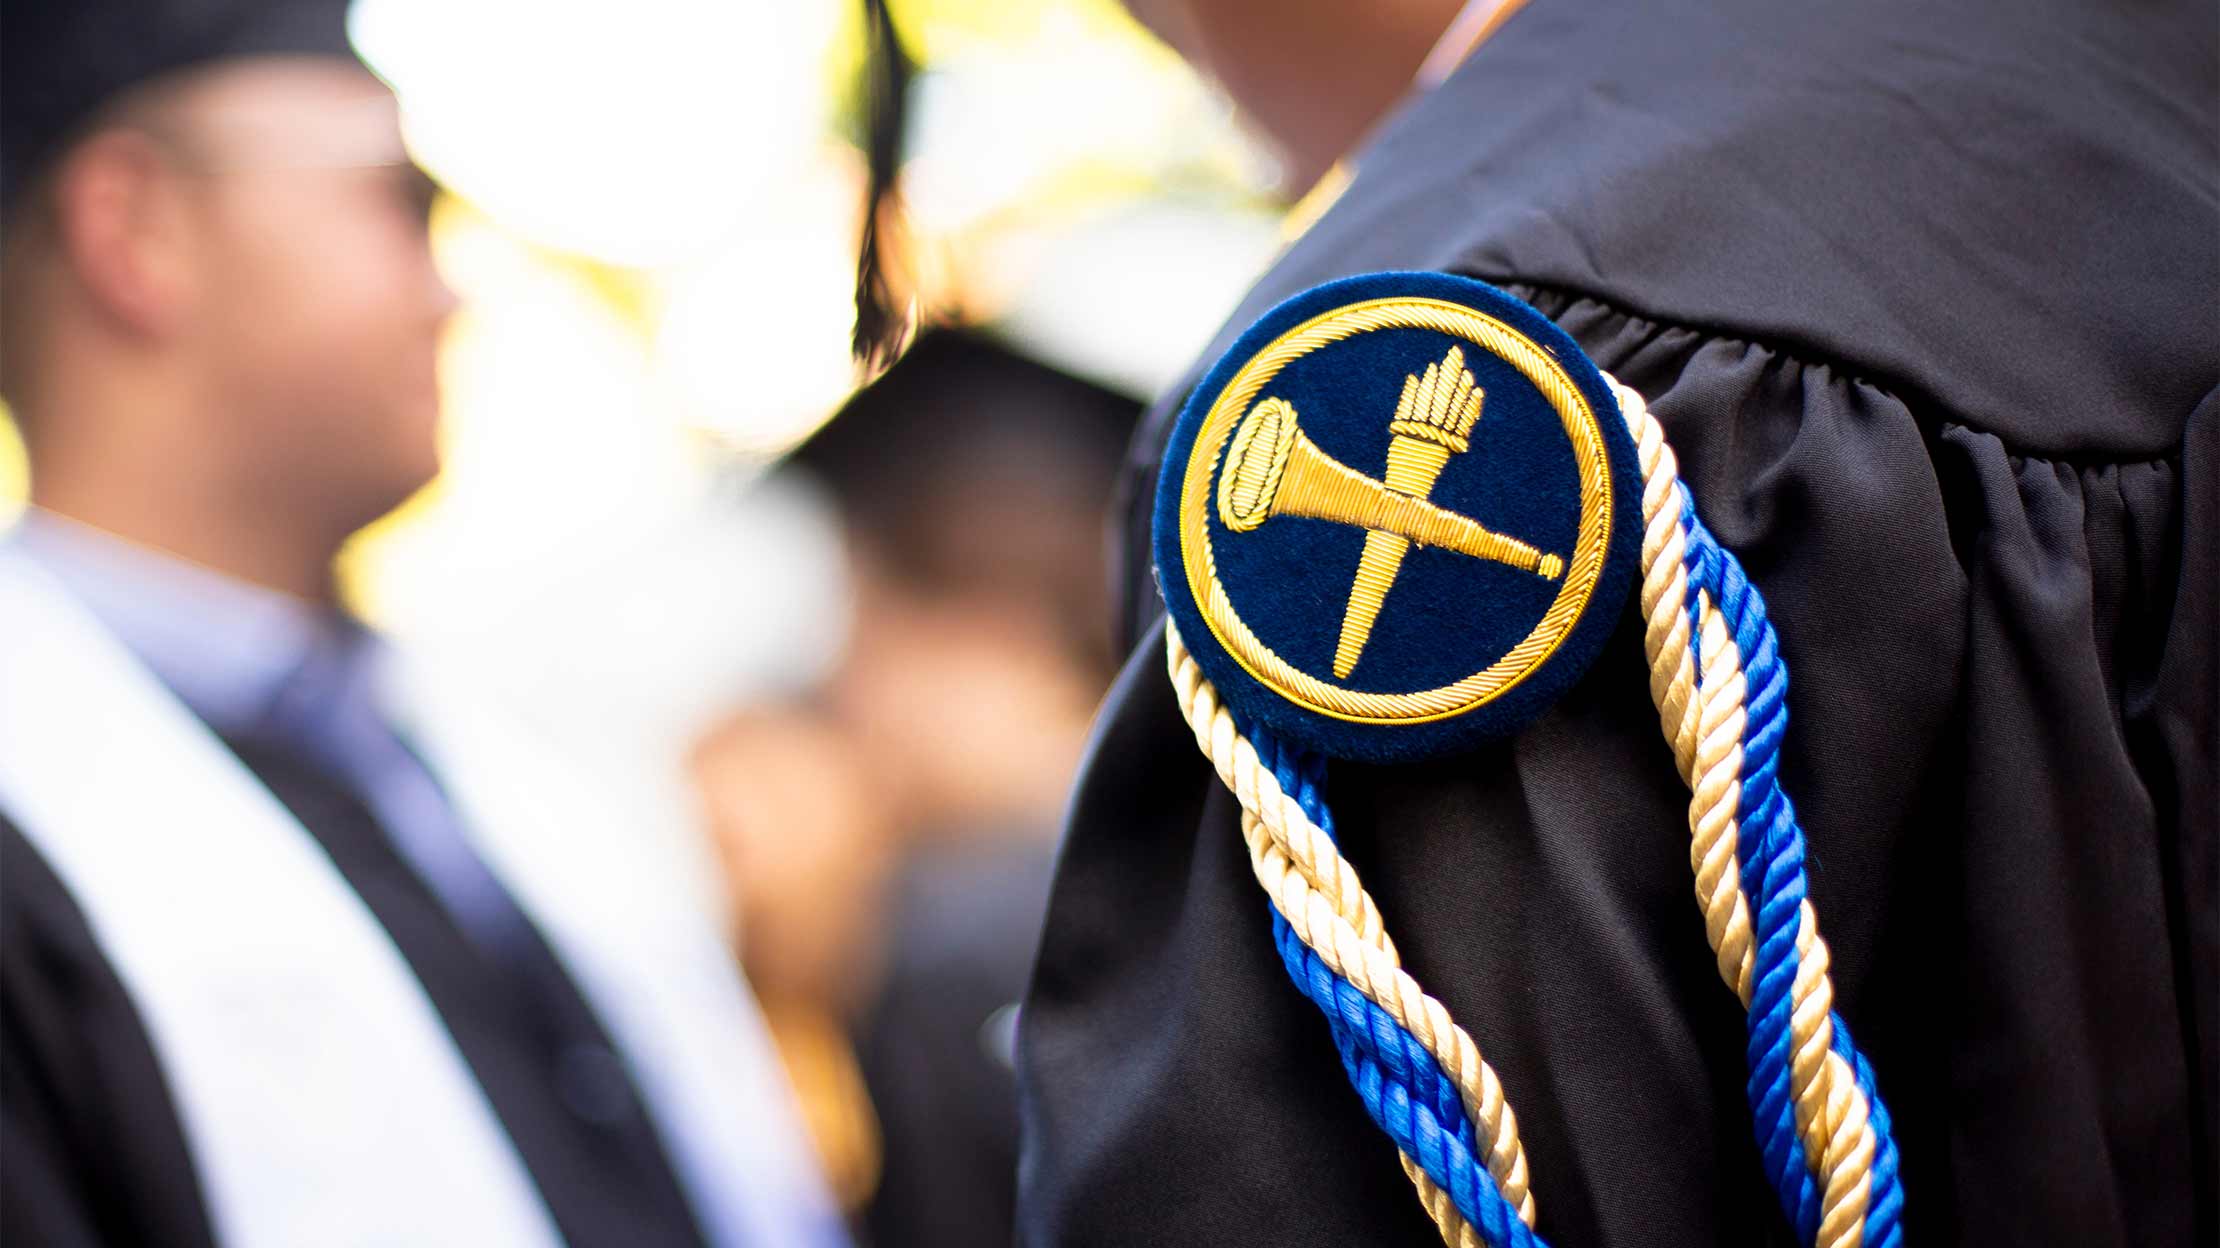 Closeup photo of an Emory patch and cord on a graduation gown